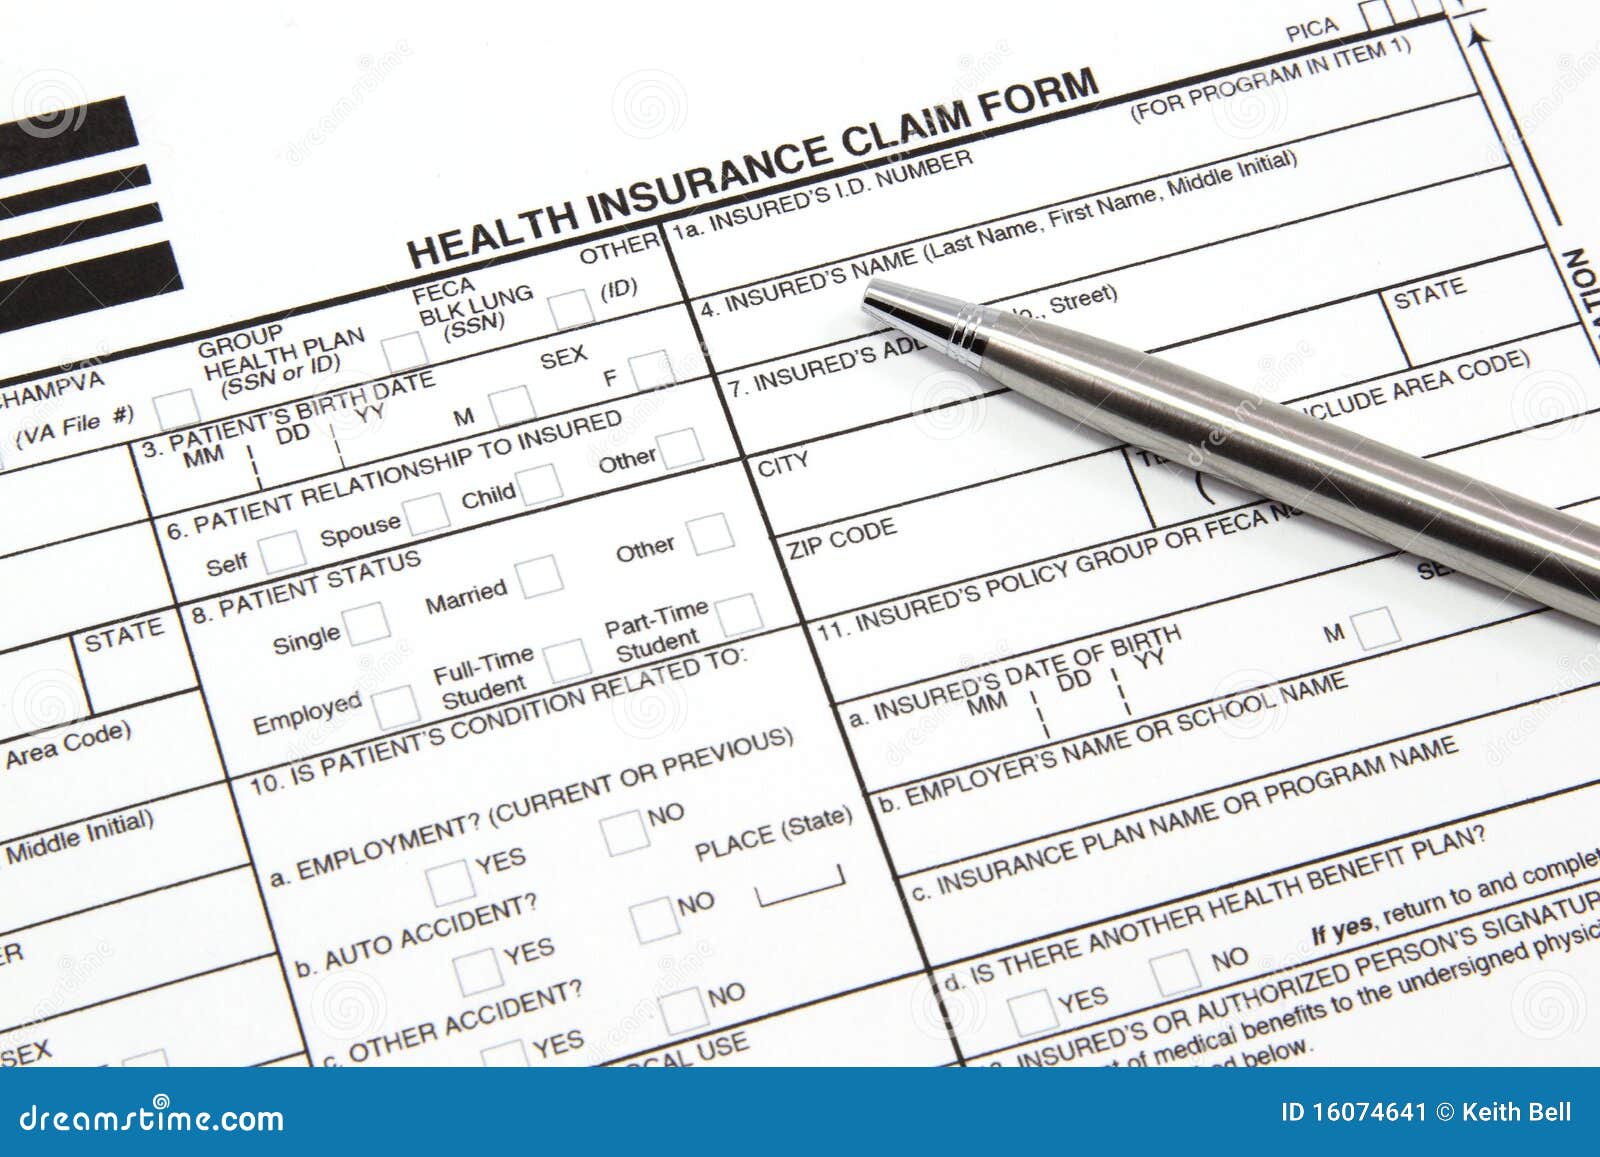 health insurance claim form with silver pen